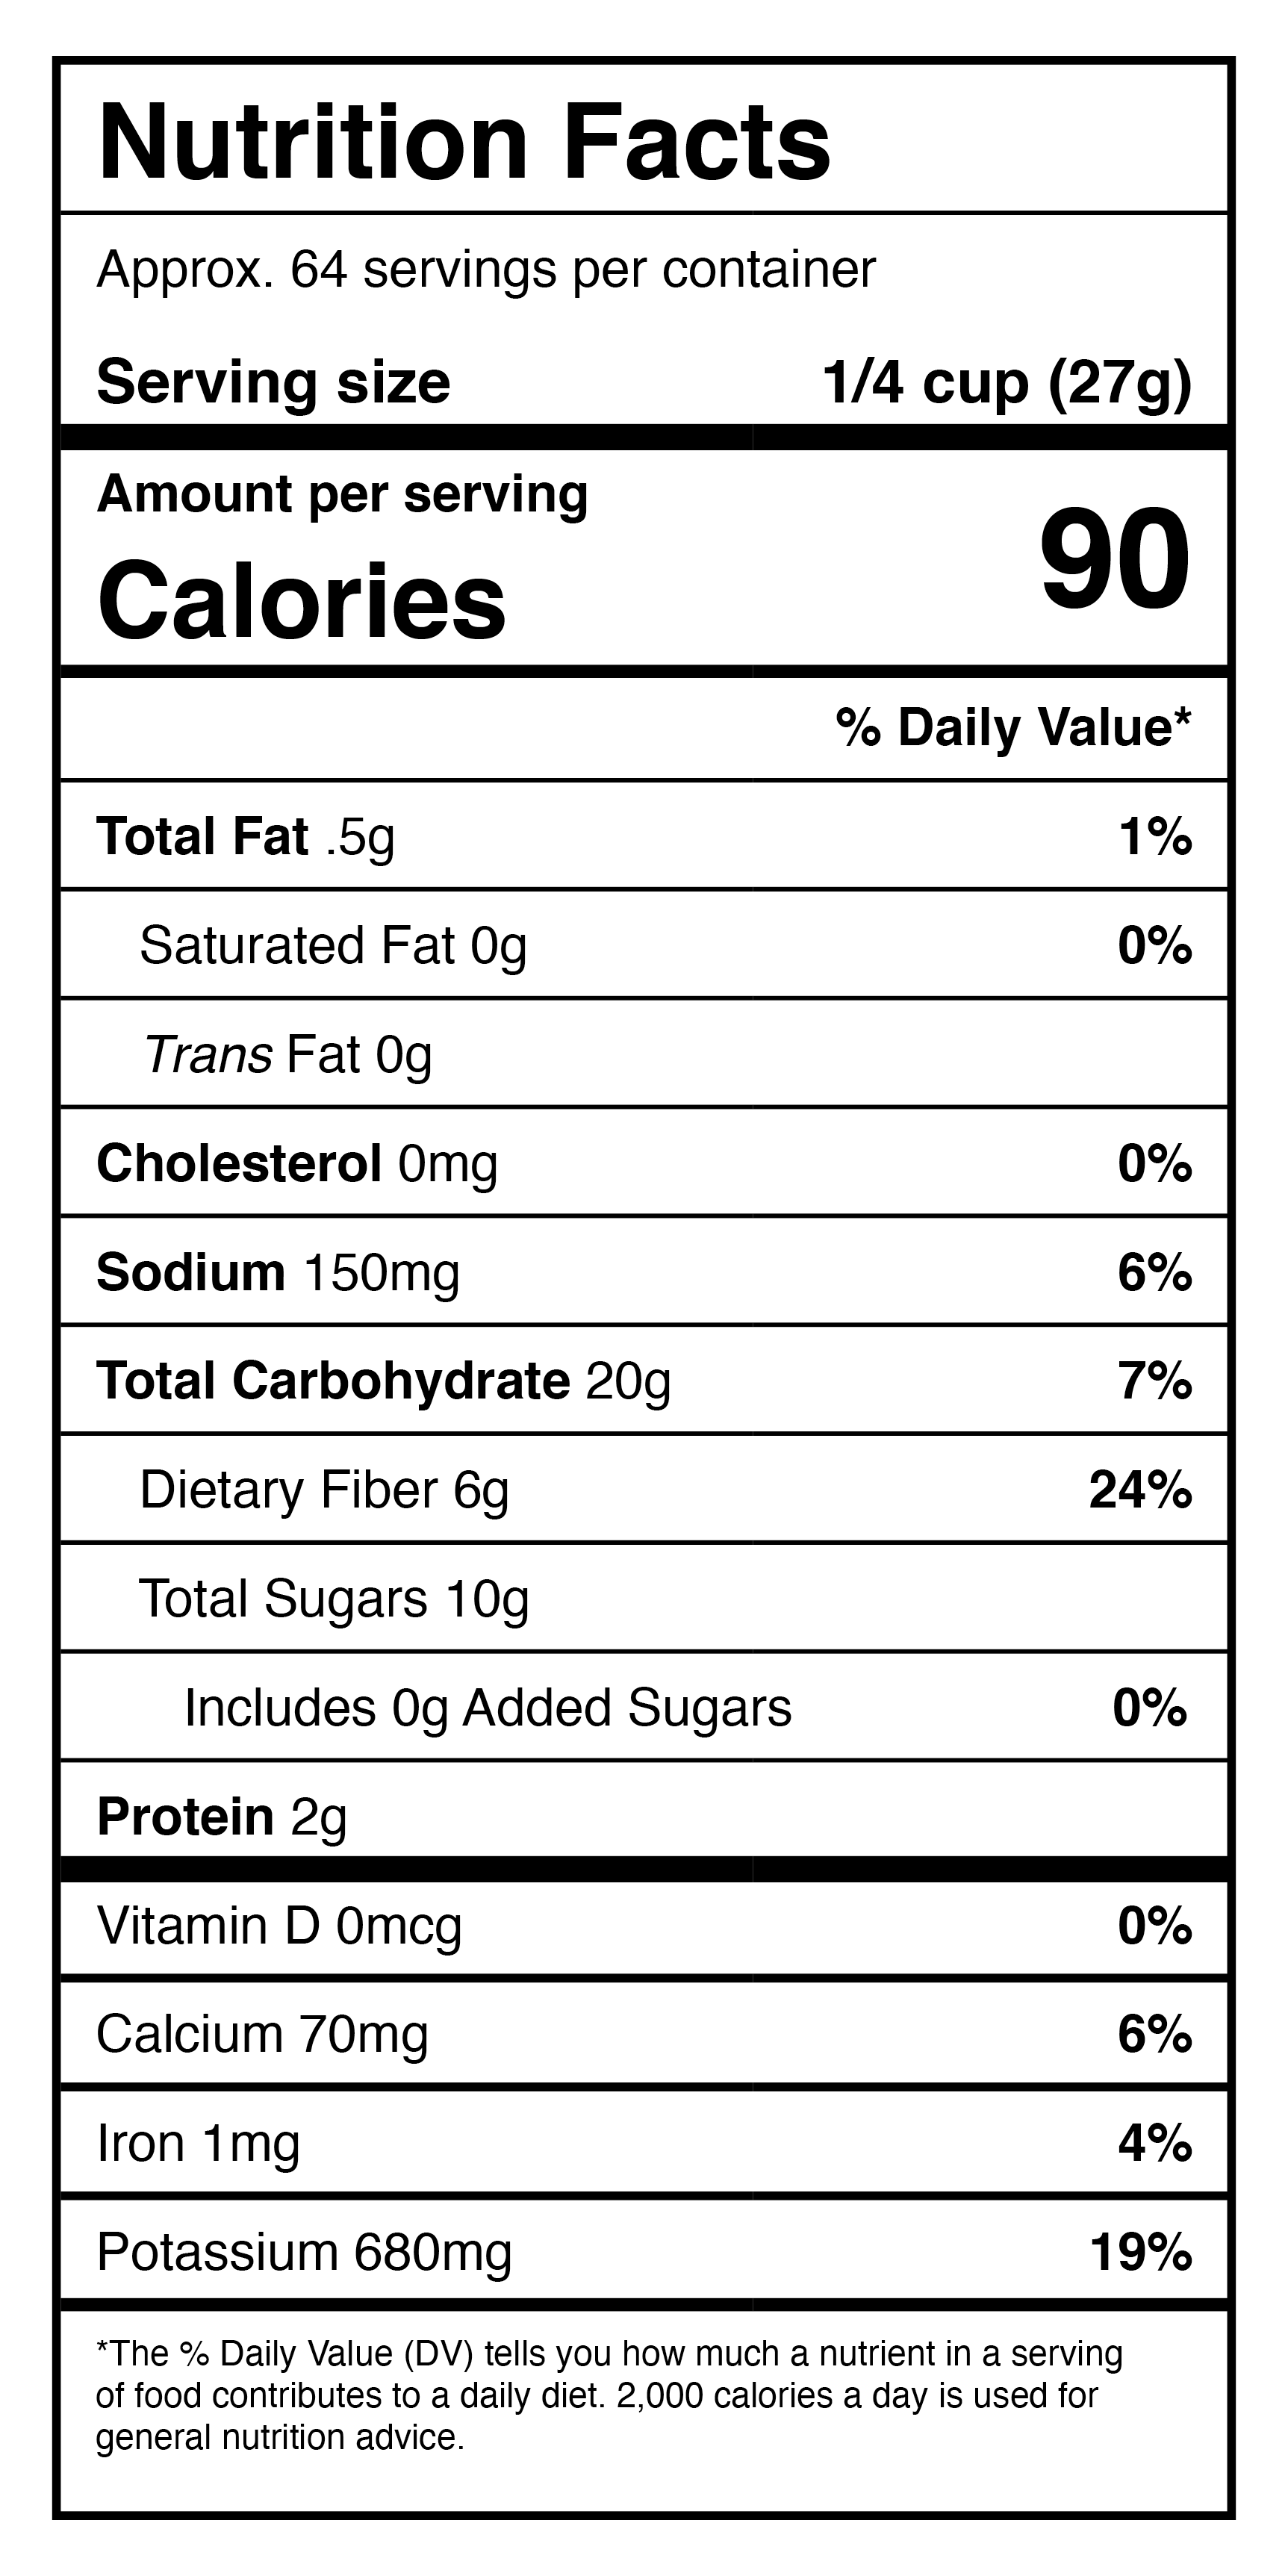 A nutrition label for a dog food with dried carrots.